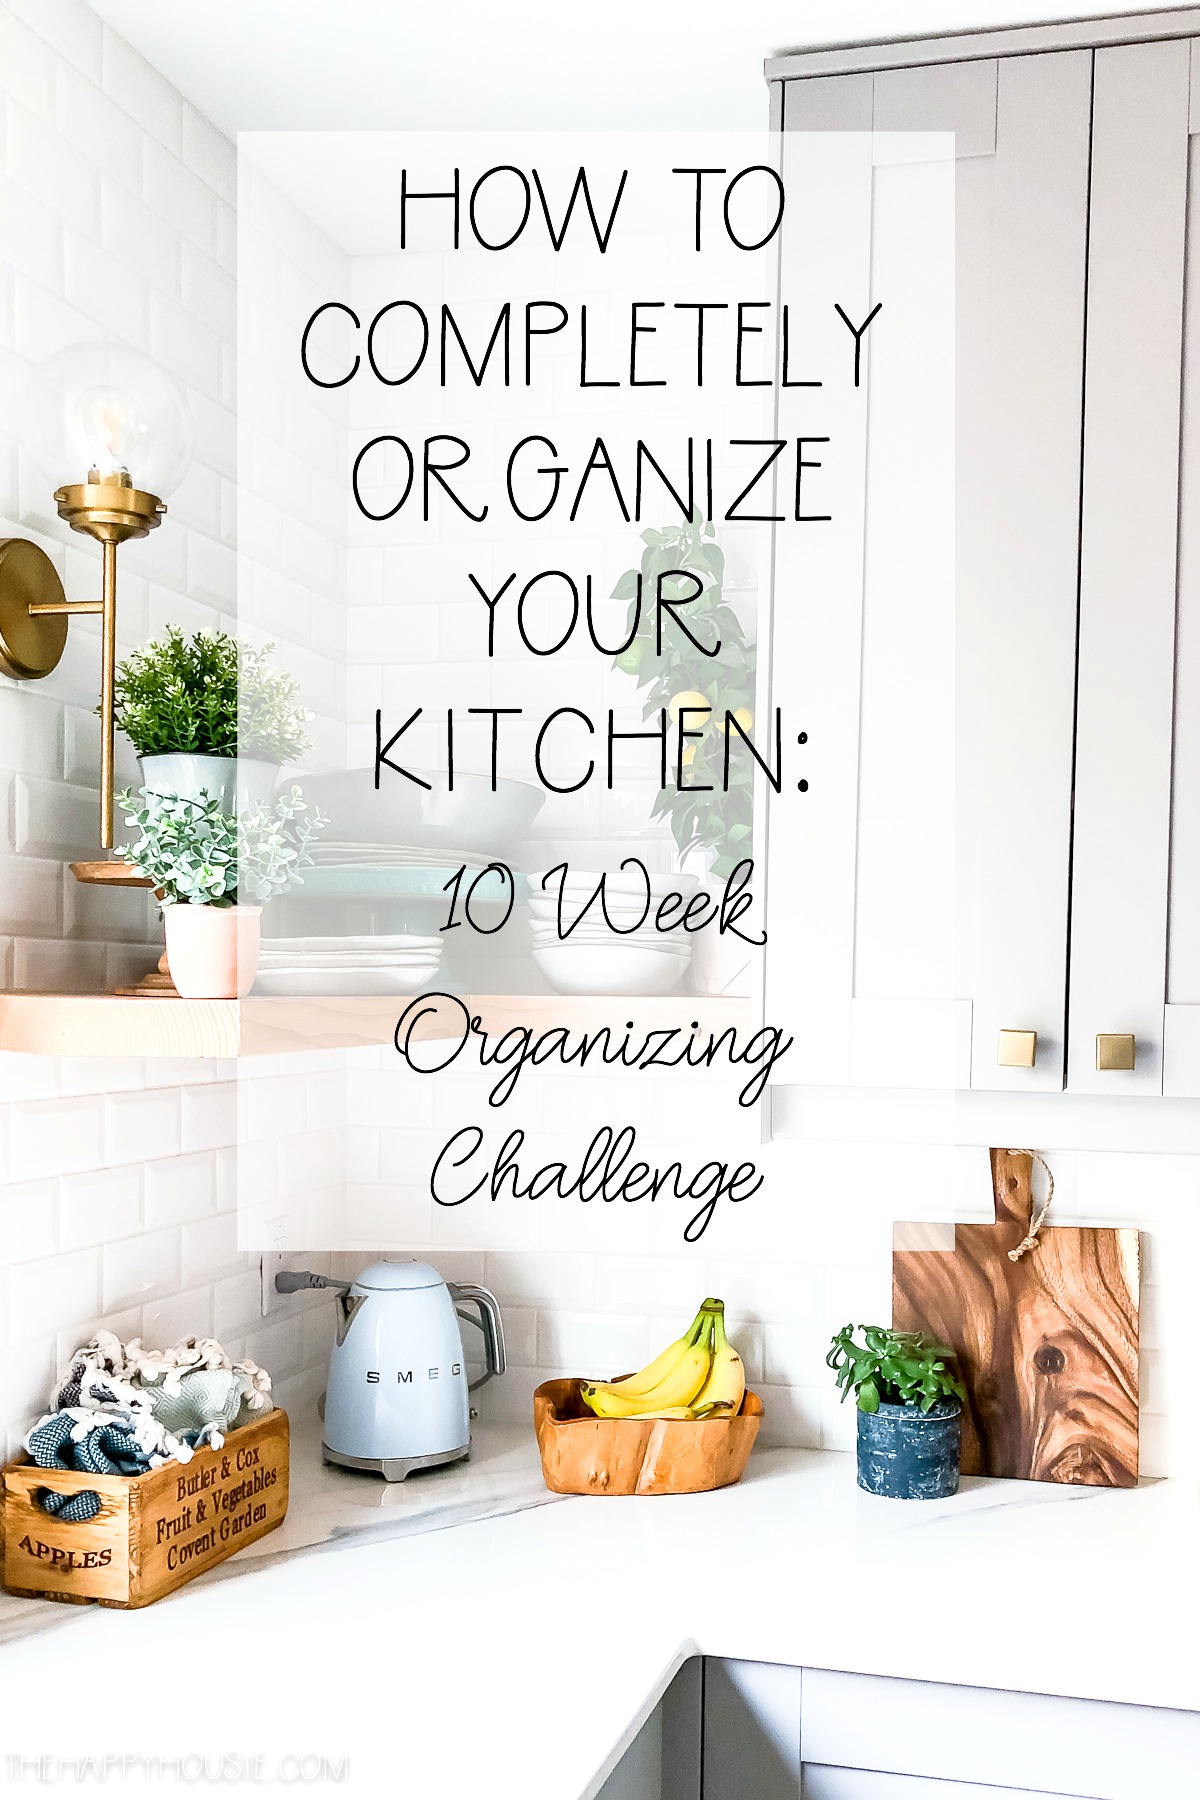 How To Completely Organize Your Kitchen 10 Week Organizing Challenge poster.